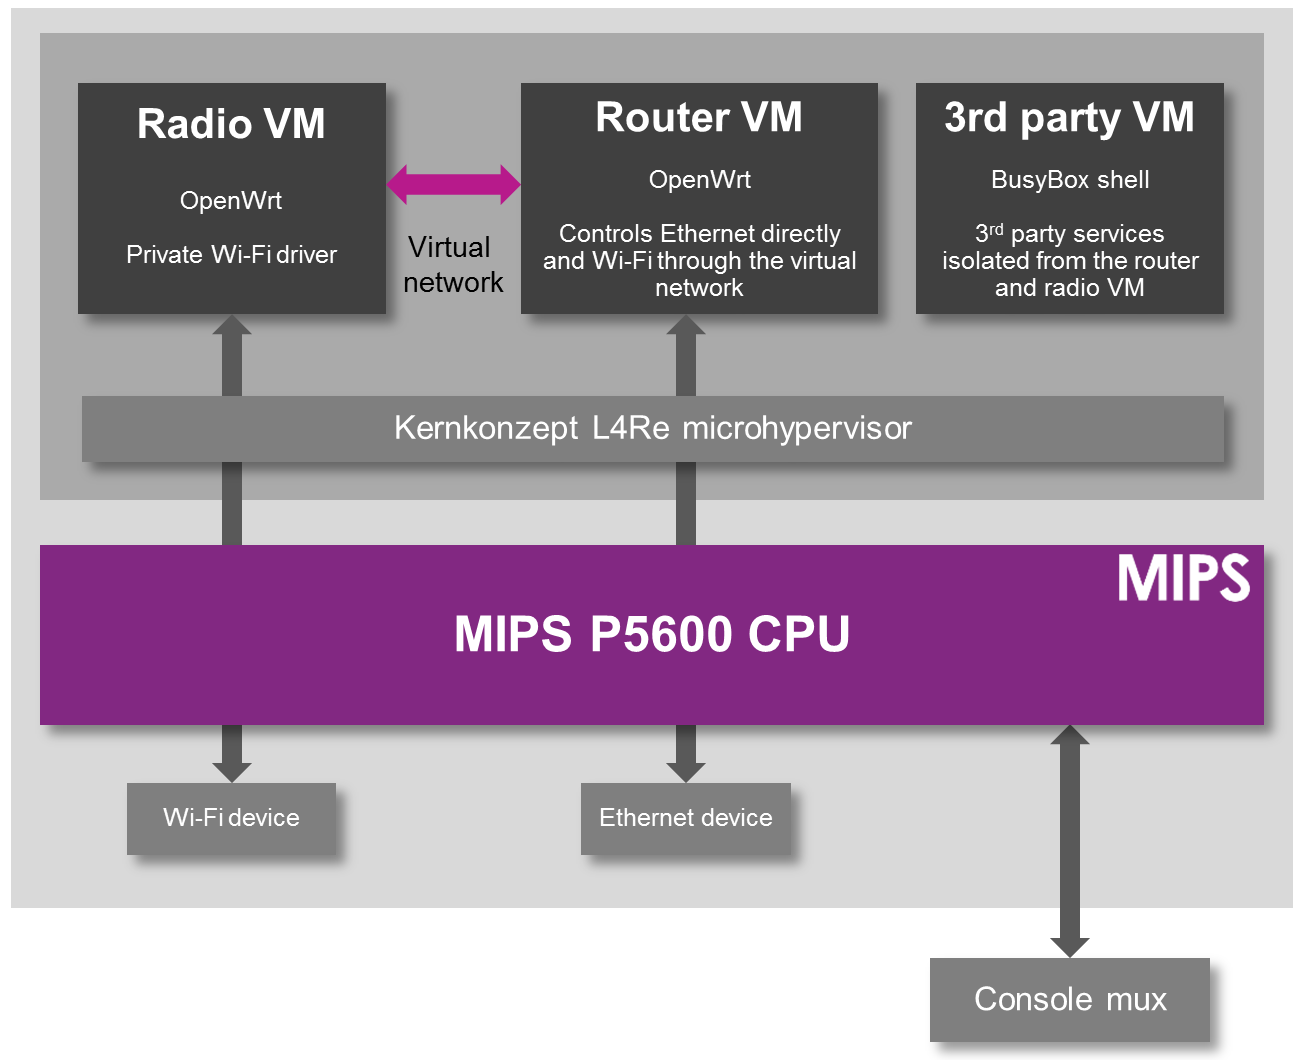 Better-security-for-OpenWrt-routers-MIPS-FCC_f